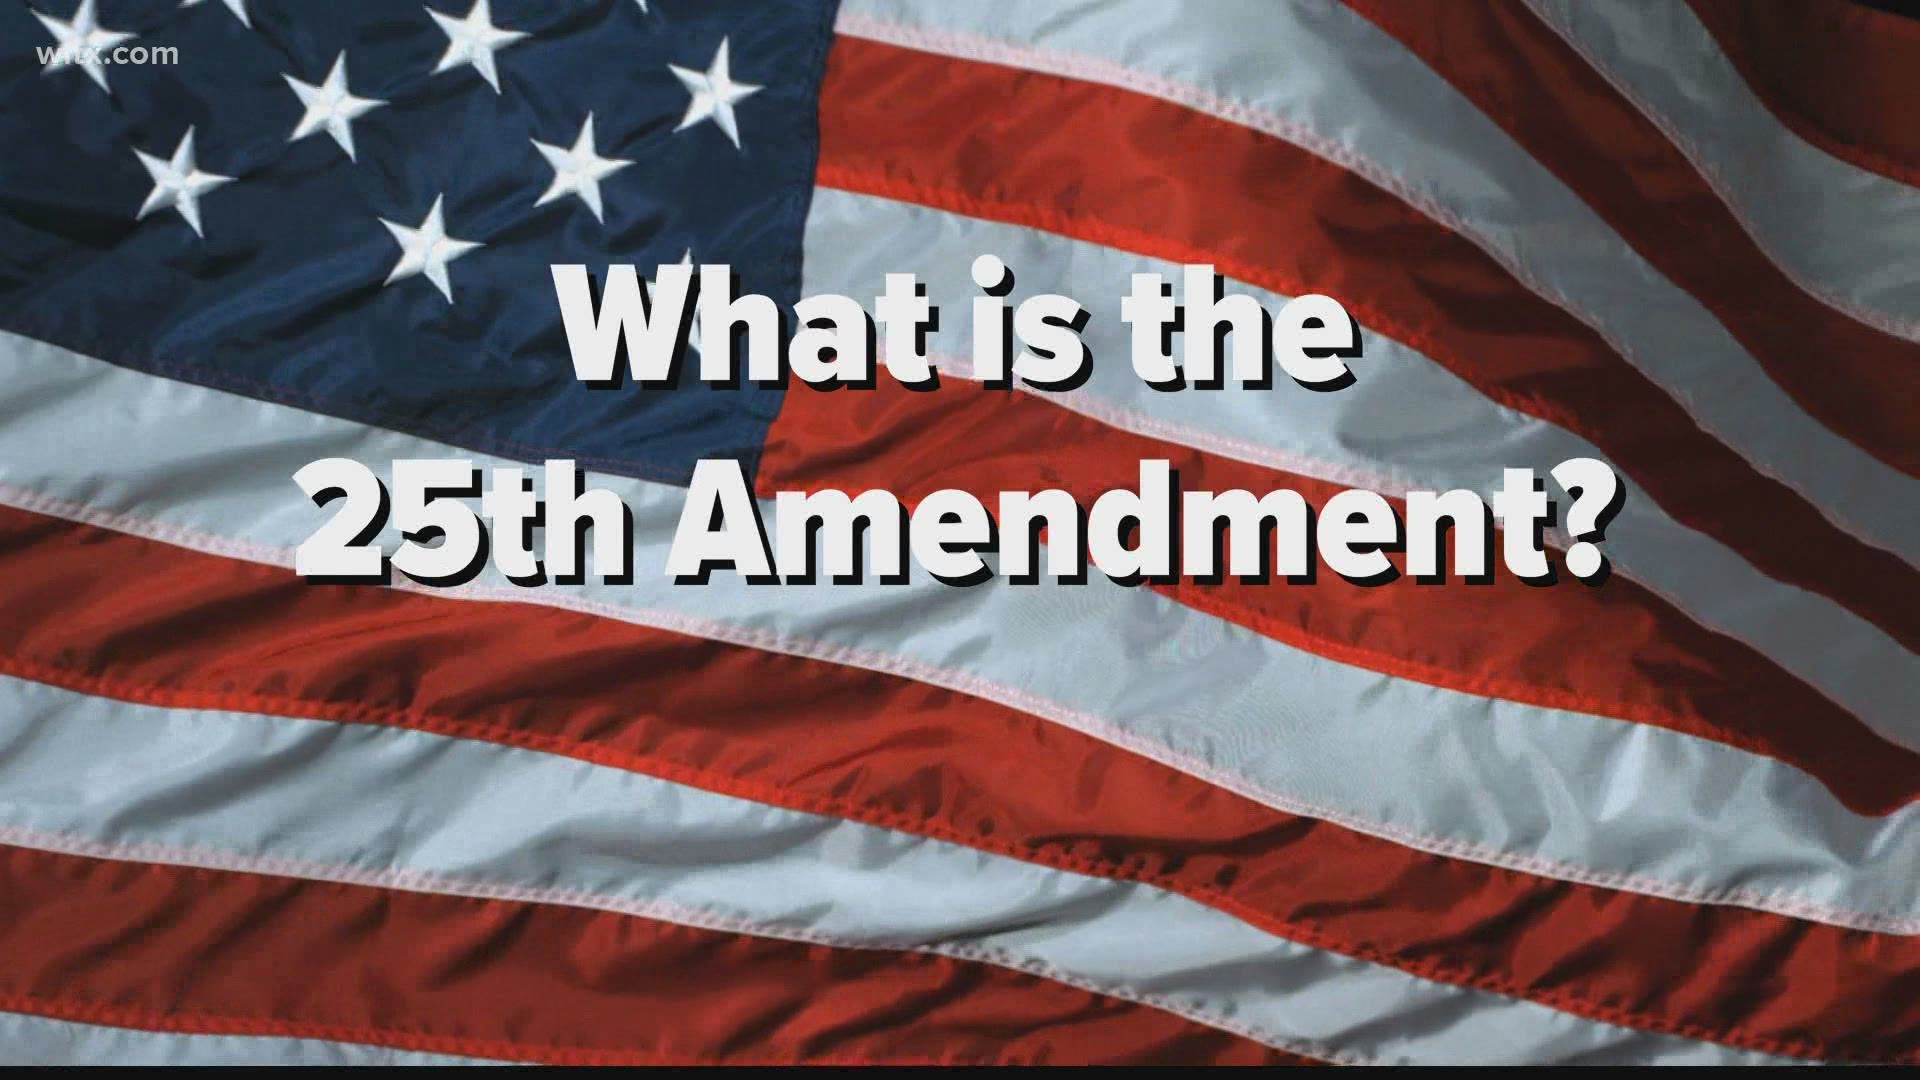 Can the Vice President invoke the 25th Amendment to remove the president from power? Here's a look at the amendment and how it would work.